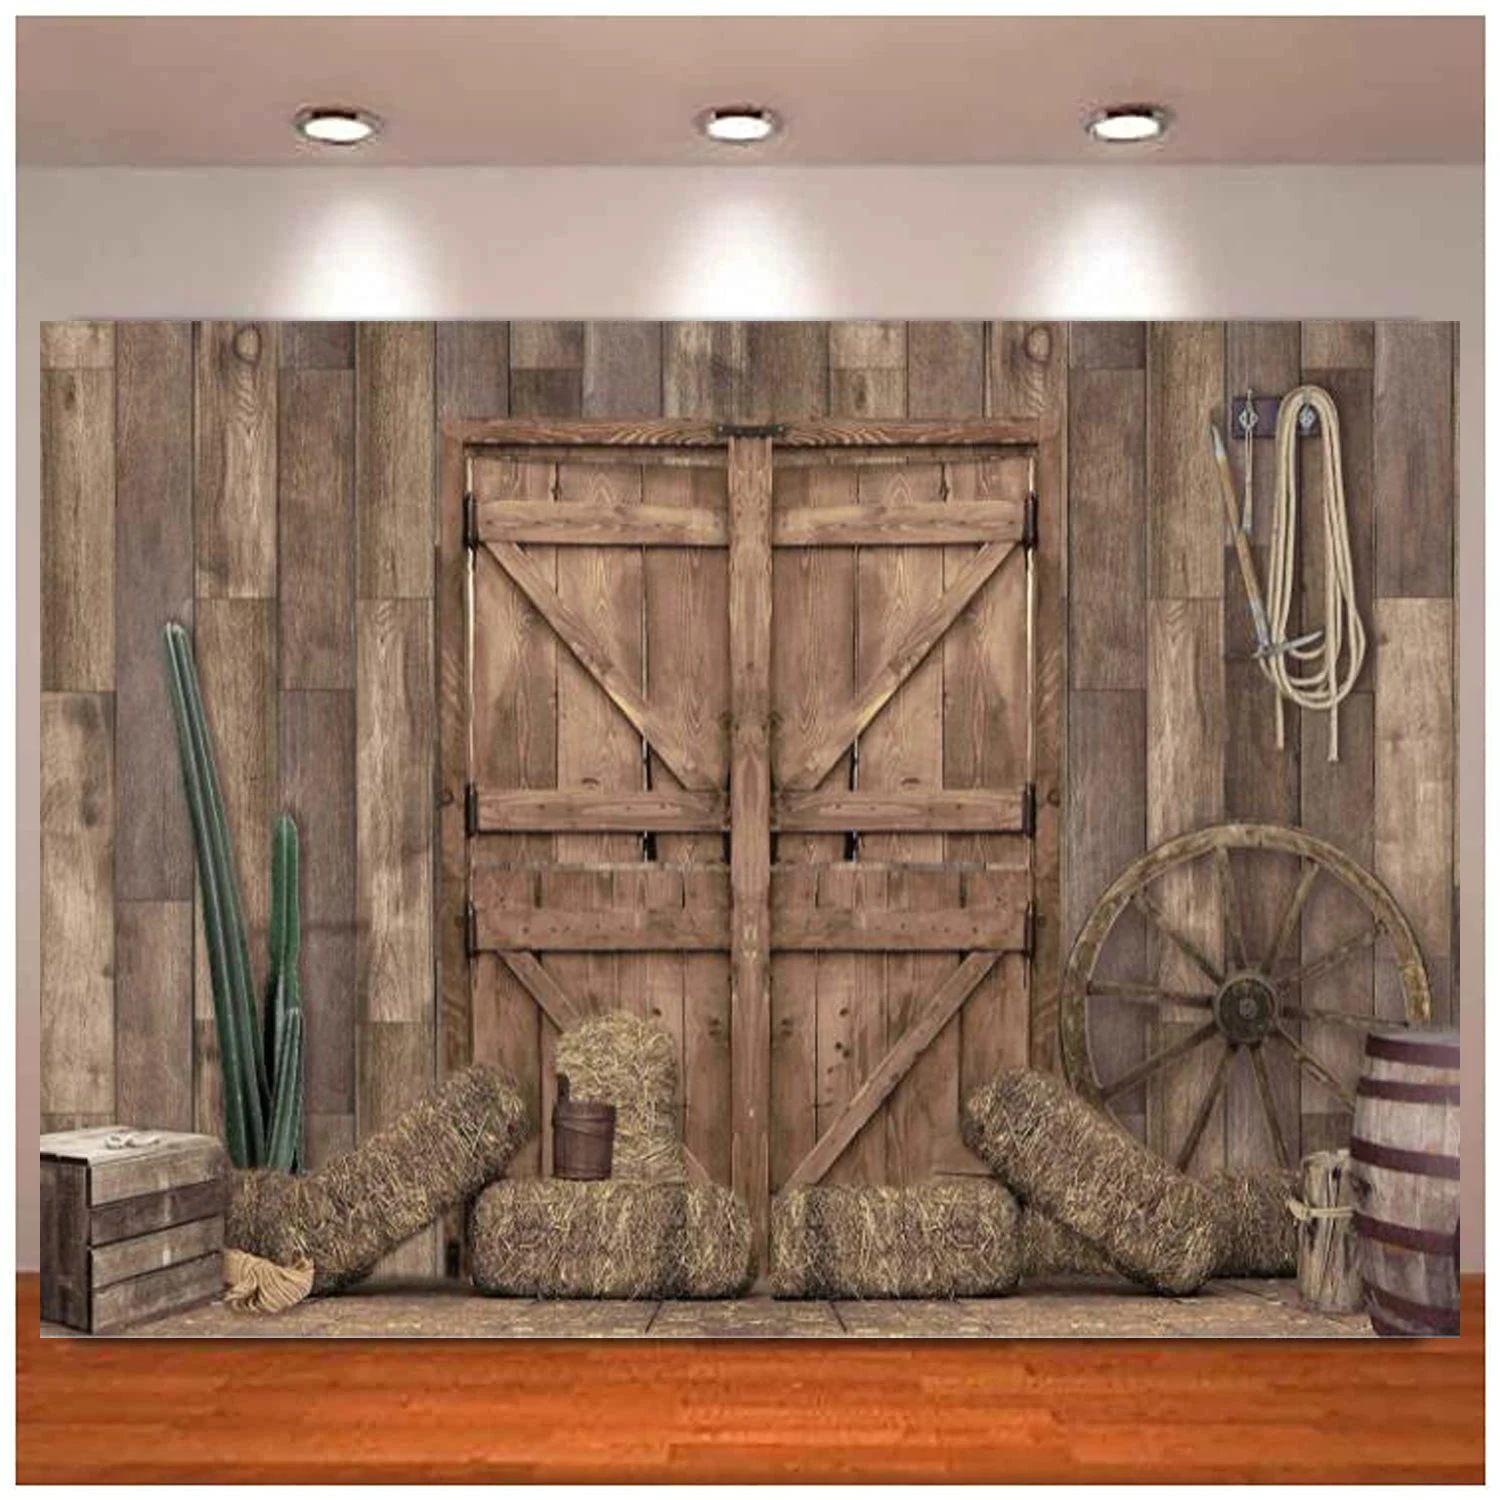 

Western Cowboy Photography Backdrop Fall Farm Door Rustic Barn Background Wild West Wooden House Baby Shower Kids Birthday Party